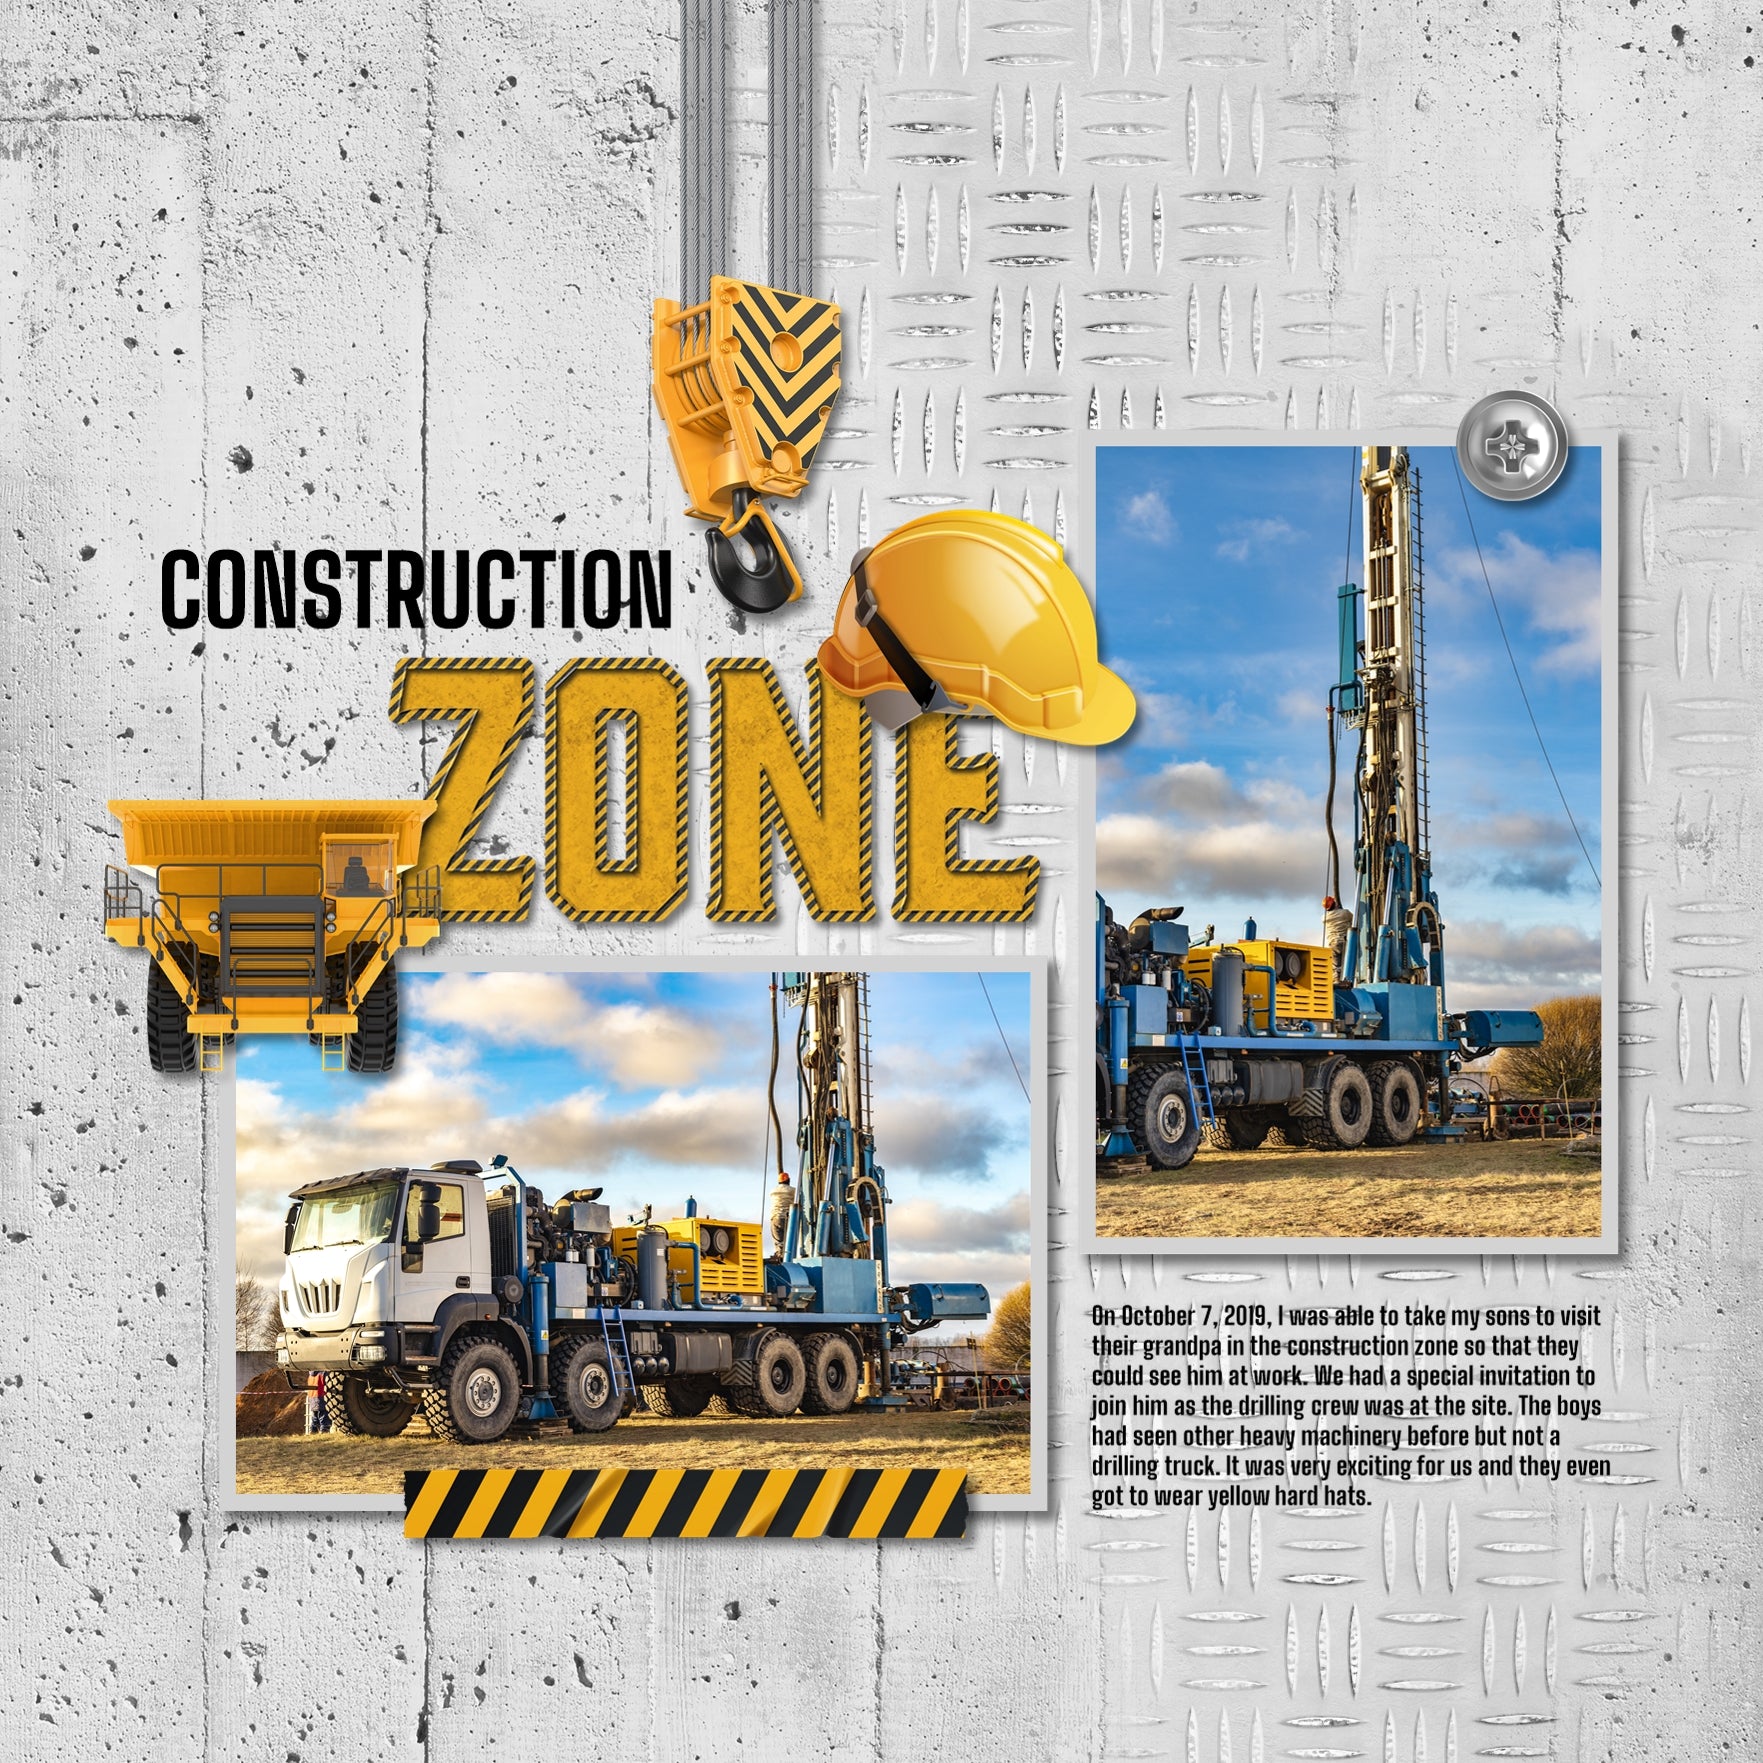 The Around the Construction Site Hazard Tape Digital Art Kit by Lucky Girl Creative is great for documenting life around the construction zone, home renovation projects, and heavy machinery operators. Also works for natural disaster areas or areas of caution.